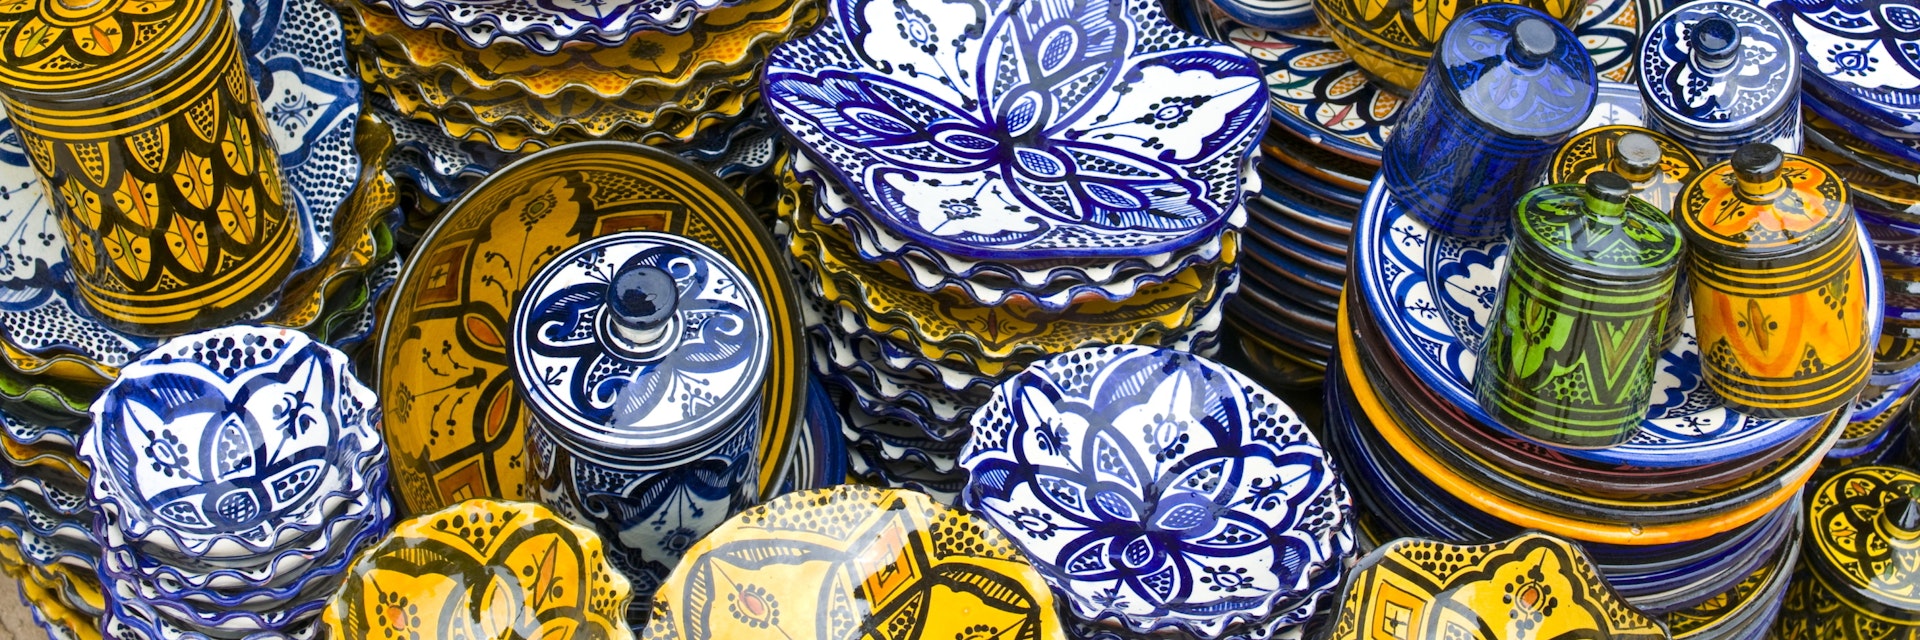 Colourful ceramics for sale, Safi, Morocco, North Africa, Africa